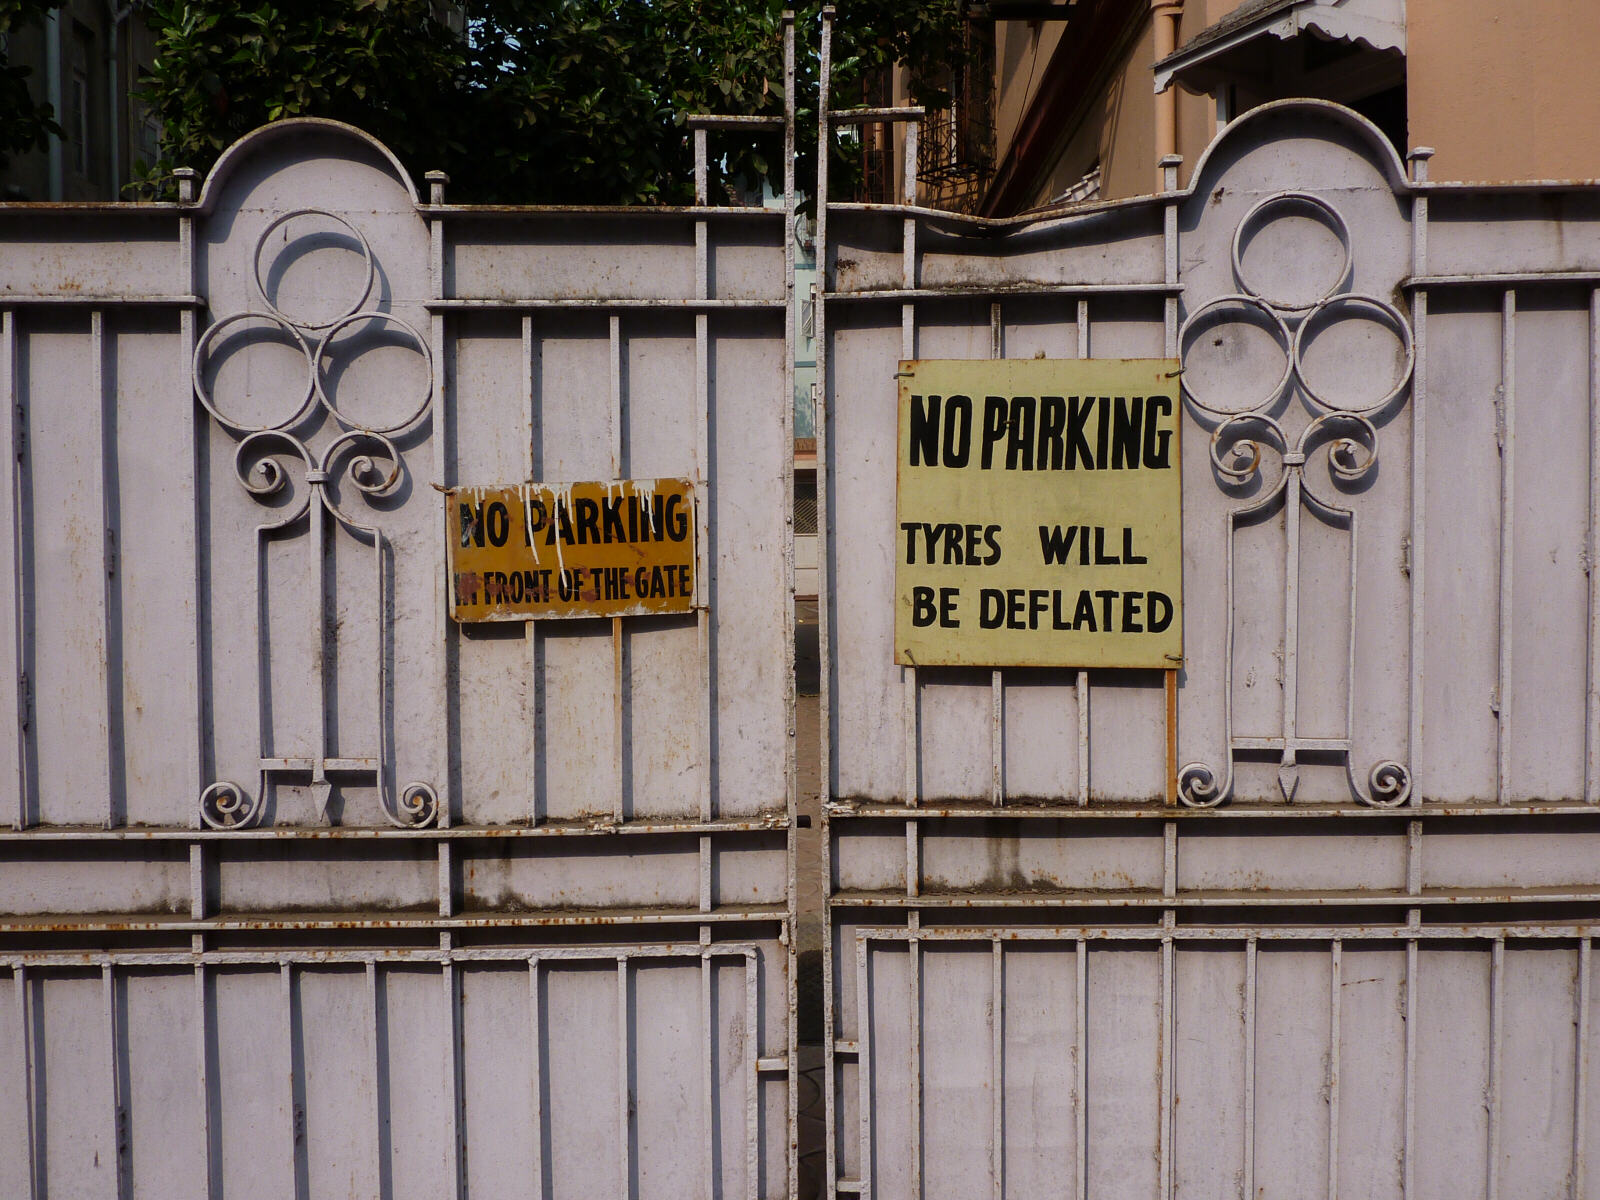 No parking in Mumbai, you have been warned!